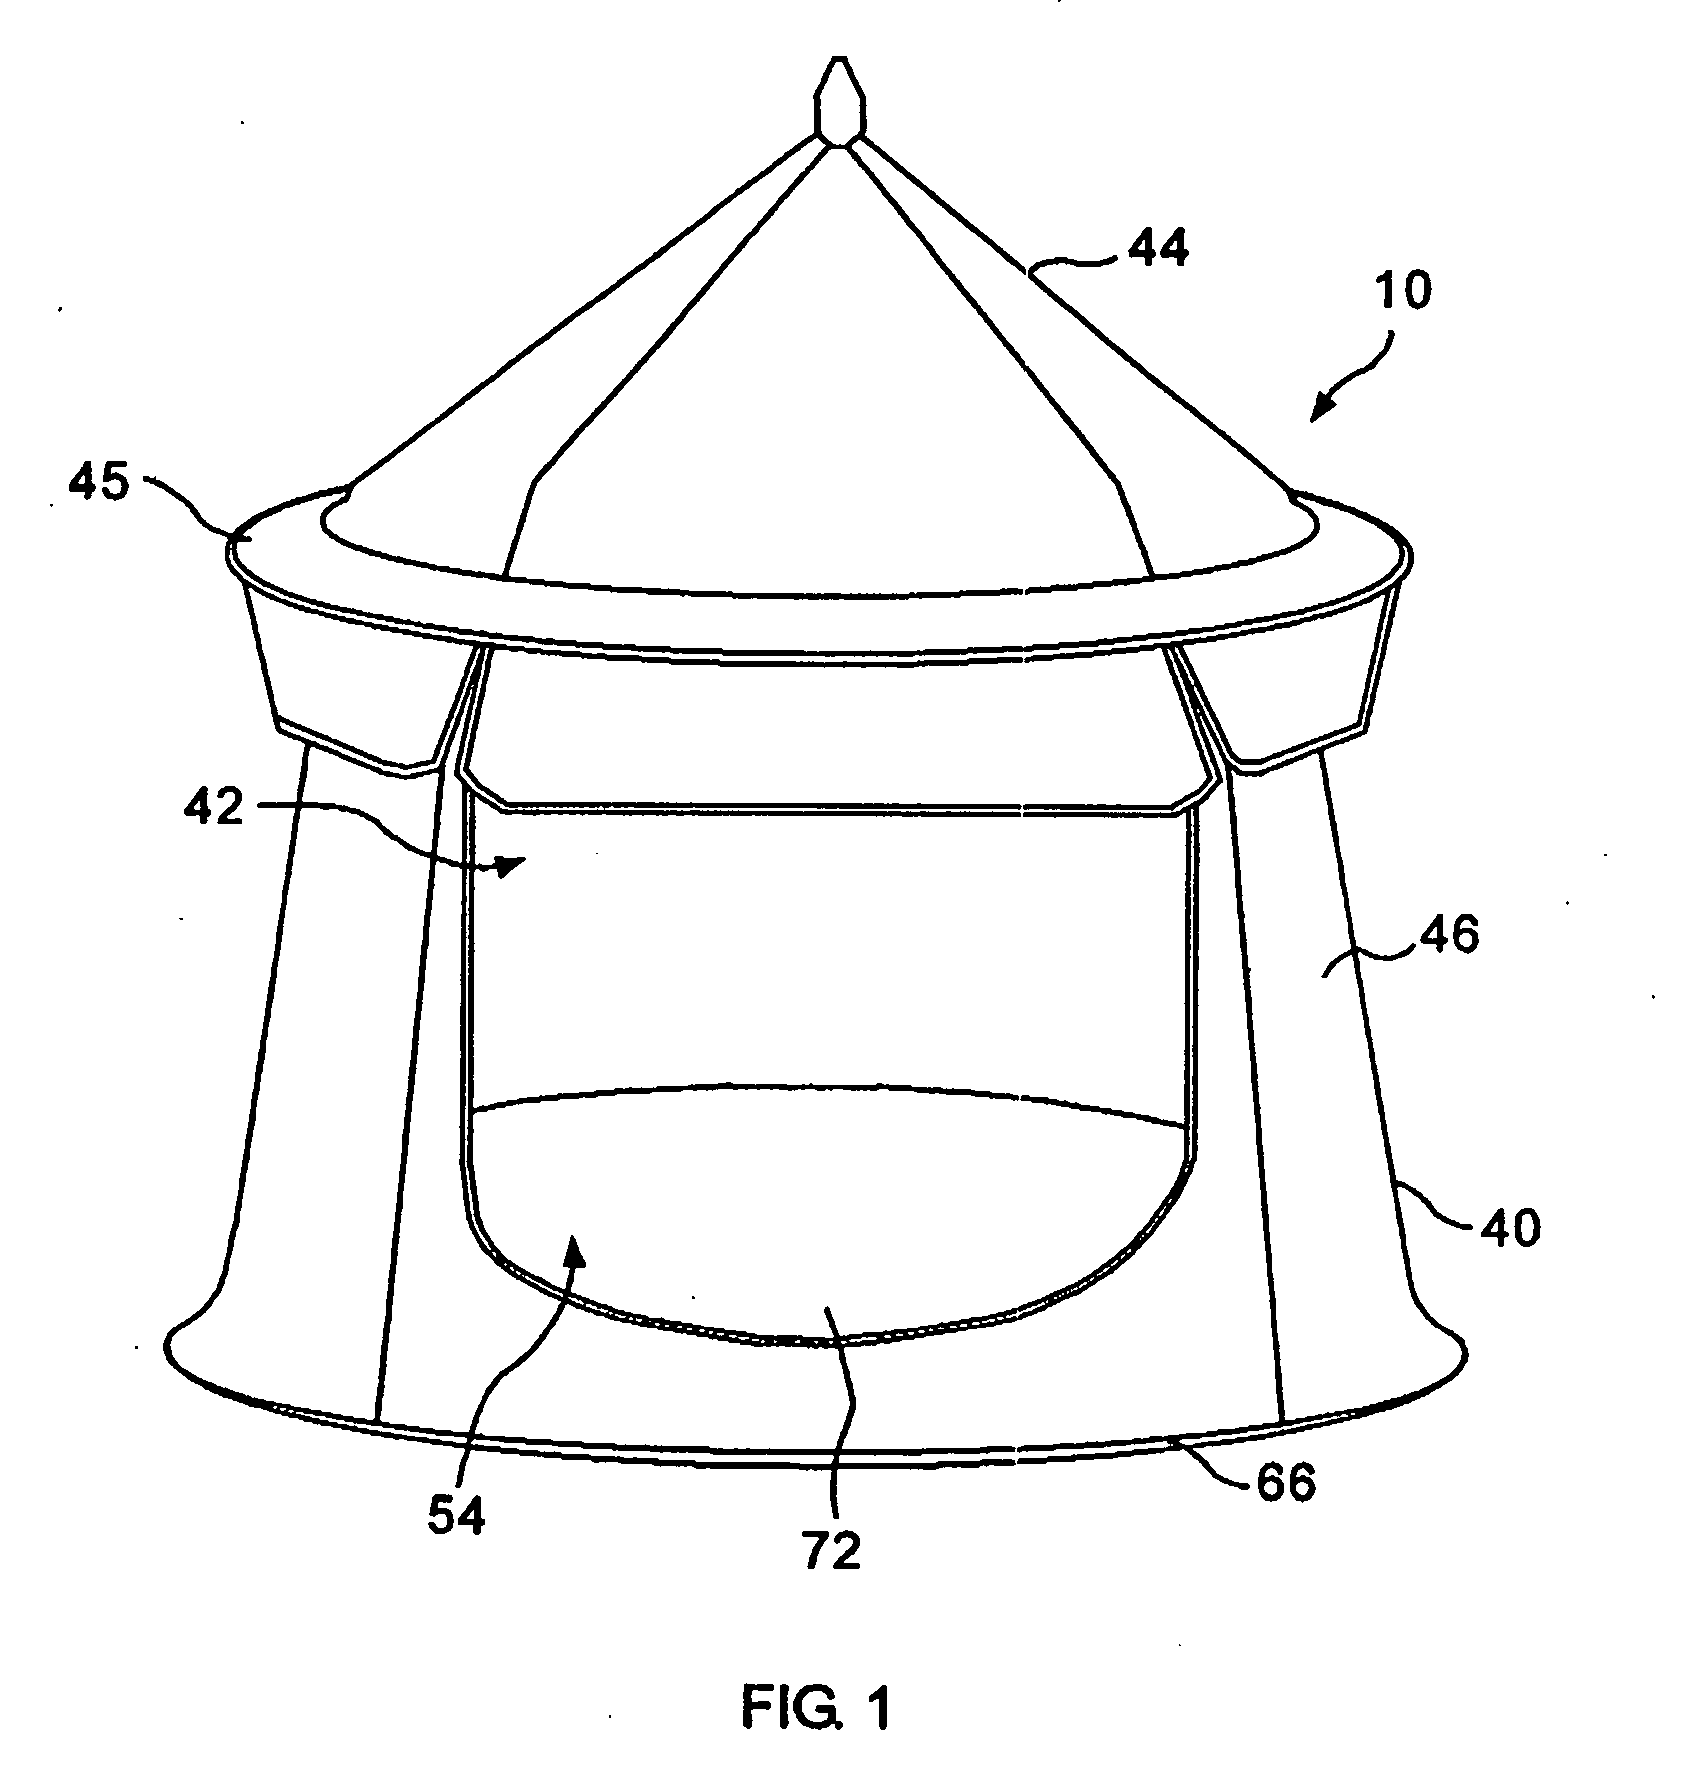 Collapsible portable shelter